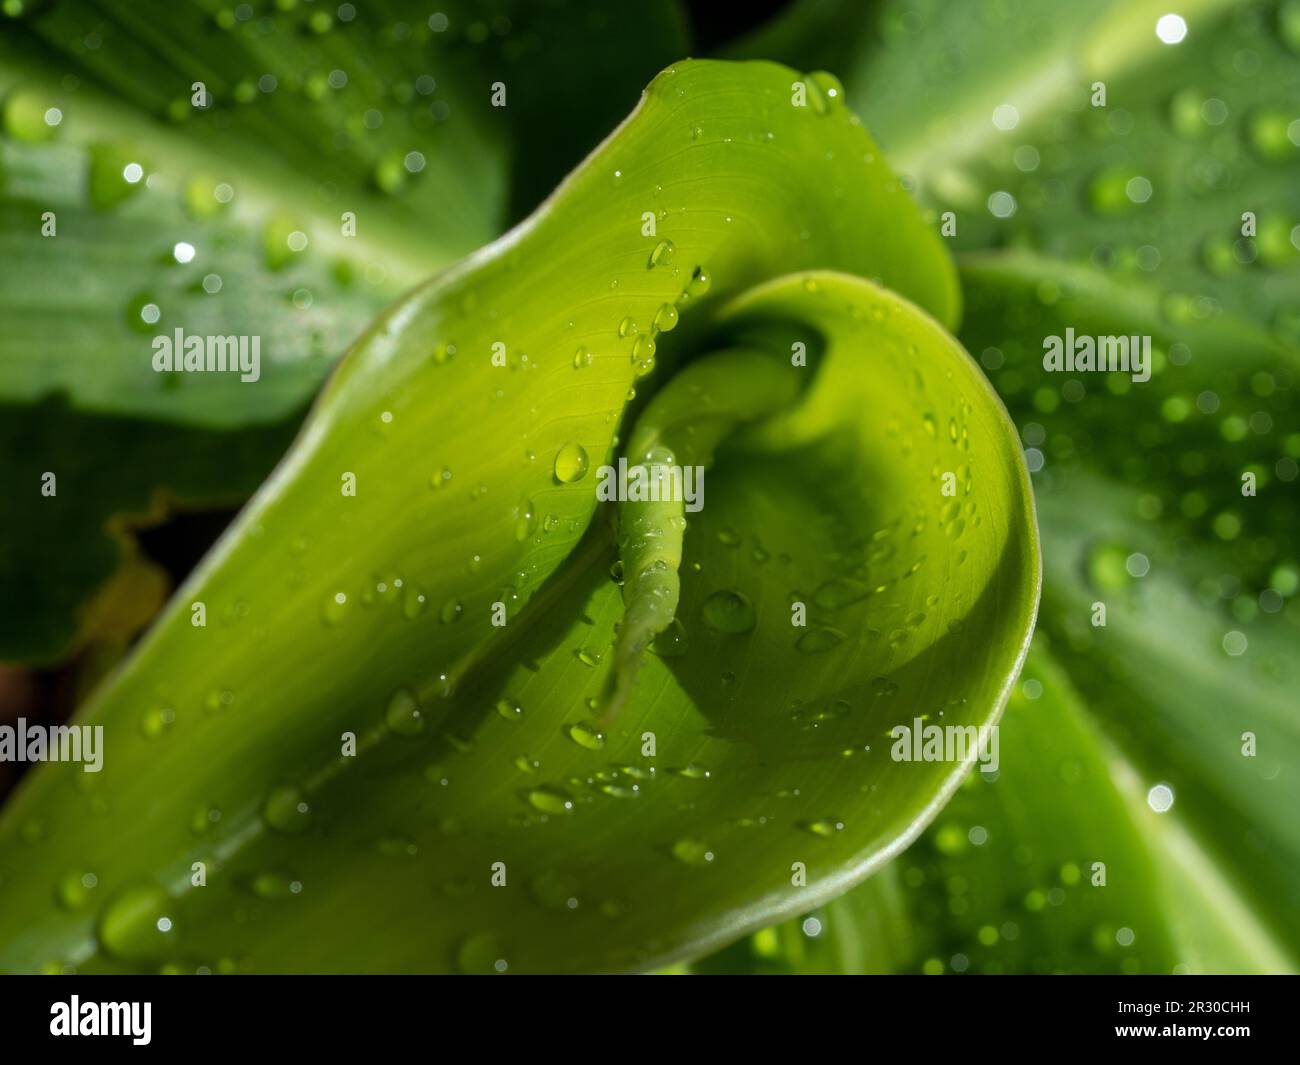 Closeup of the green leaves of the Spiral ginger plant spiral around a central stem, fresh and covered in water droplets Stock Photo